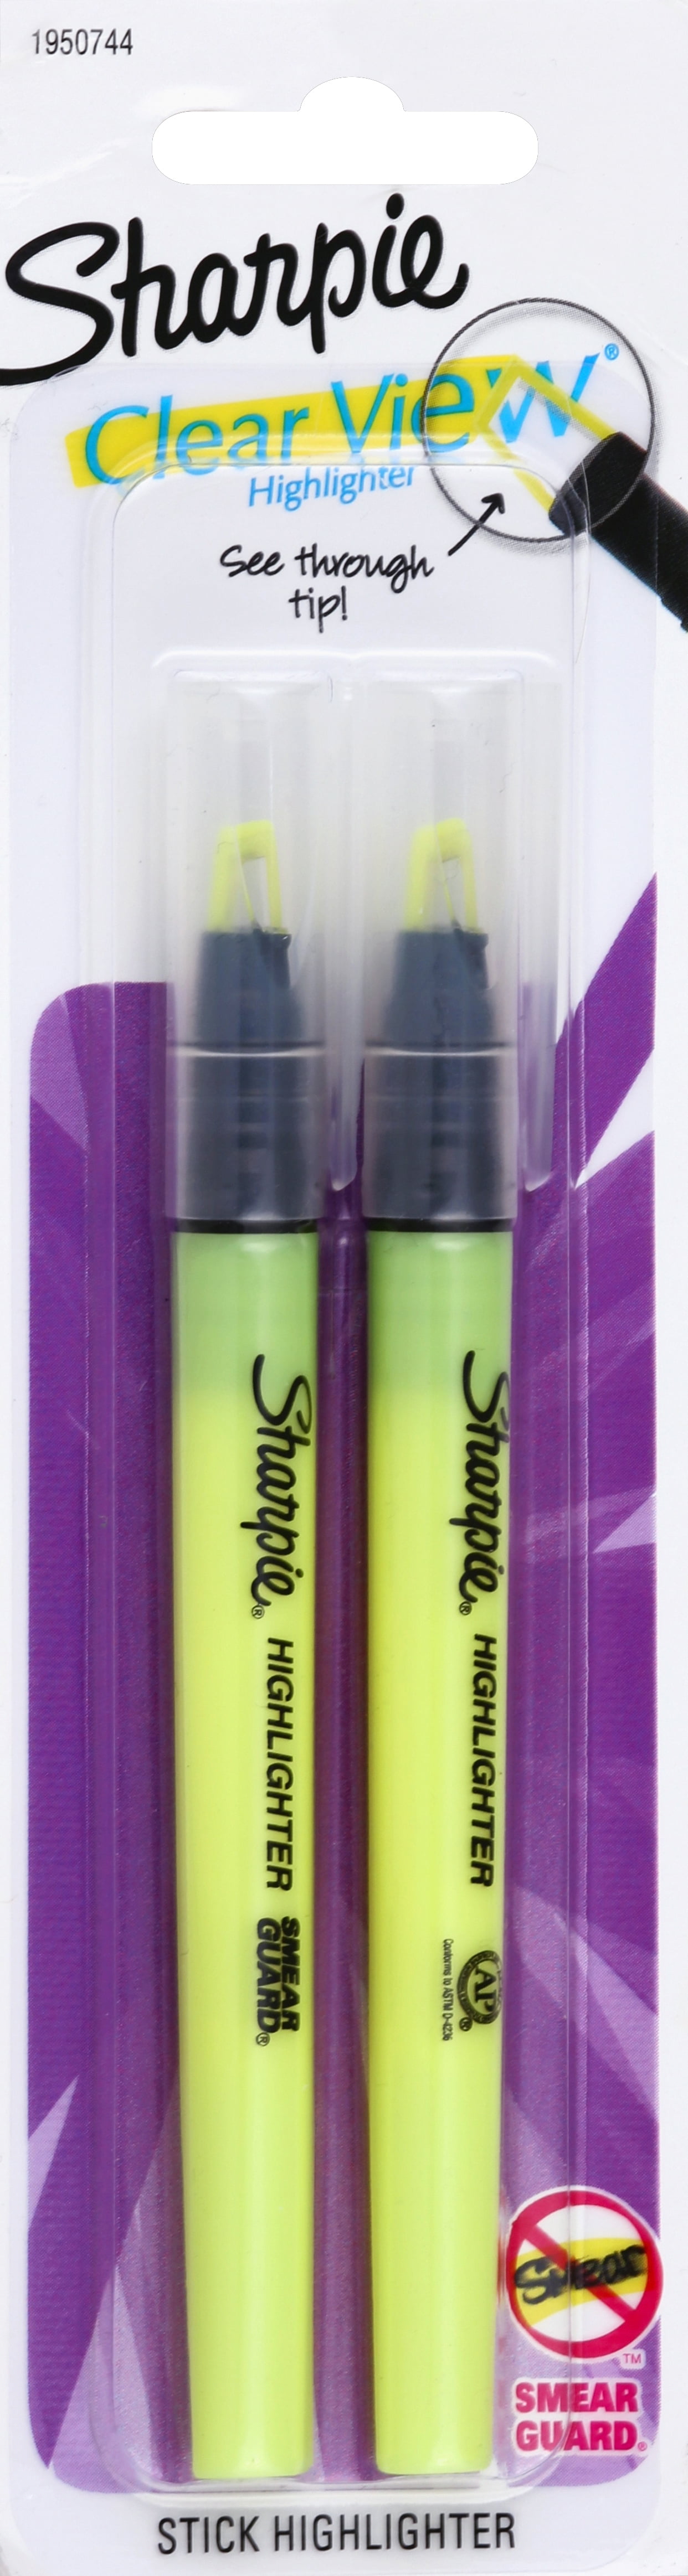 Sharpie Highlighter, Clear View Highlighter with See-Through Chisel Tip,  Stick Highlighter, Yellow, 2 Count 